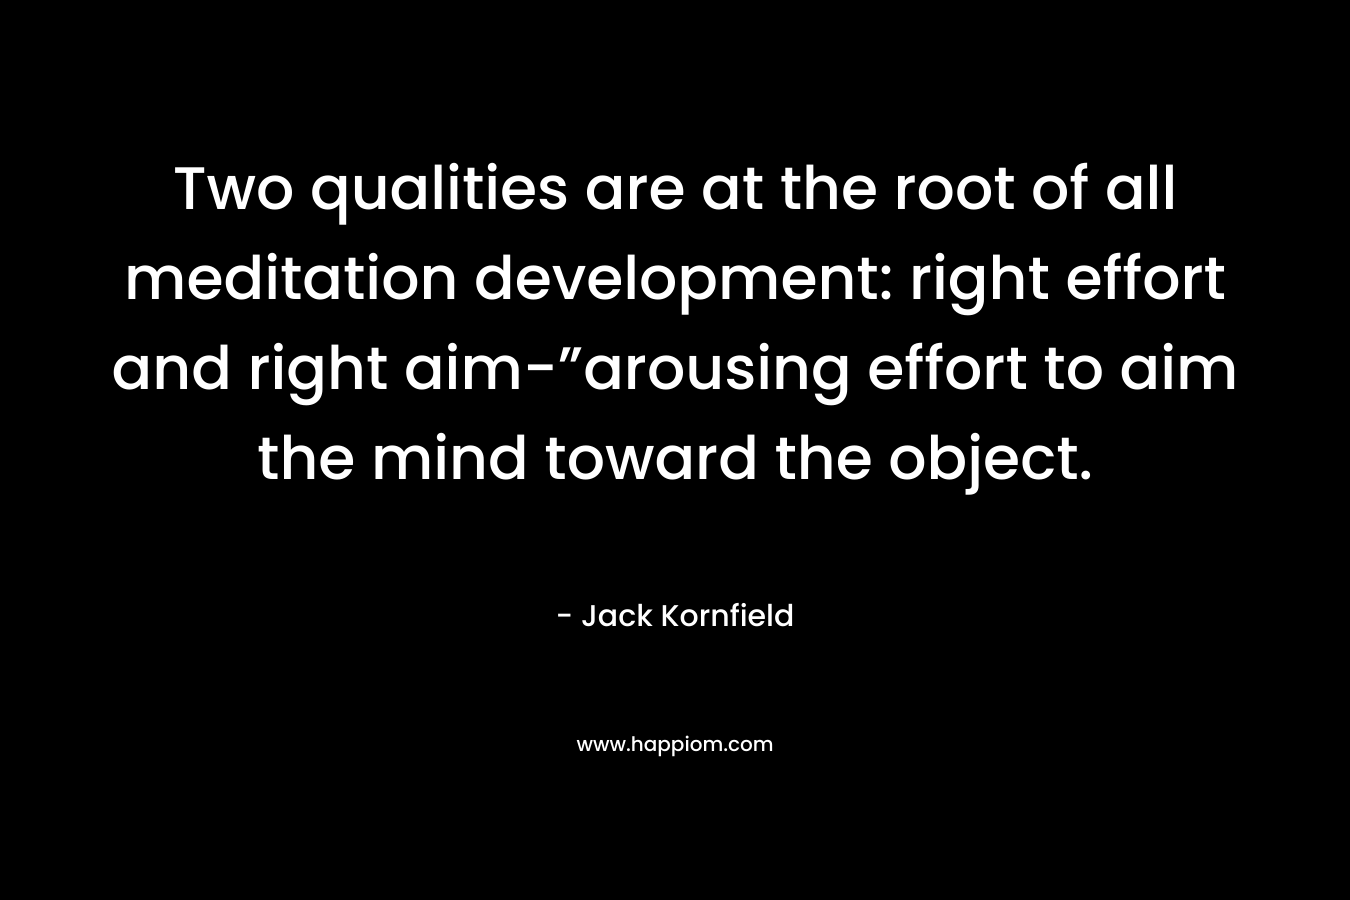 Two qualities are at the root of all meditation development: right effort and right aim-”arousing effort to aim the mind toward the object.